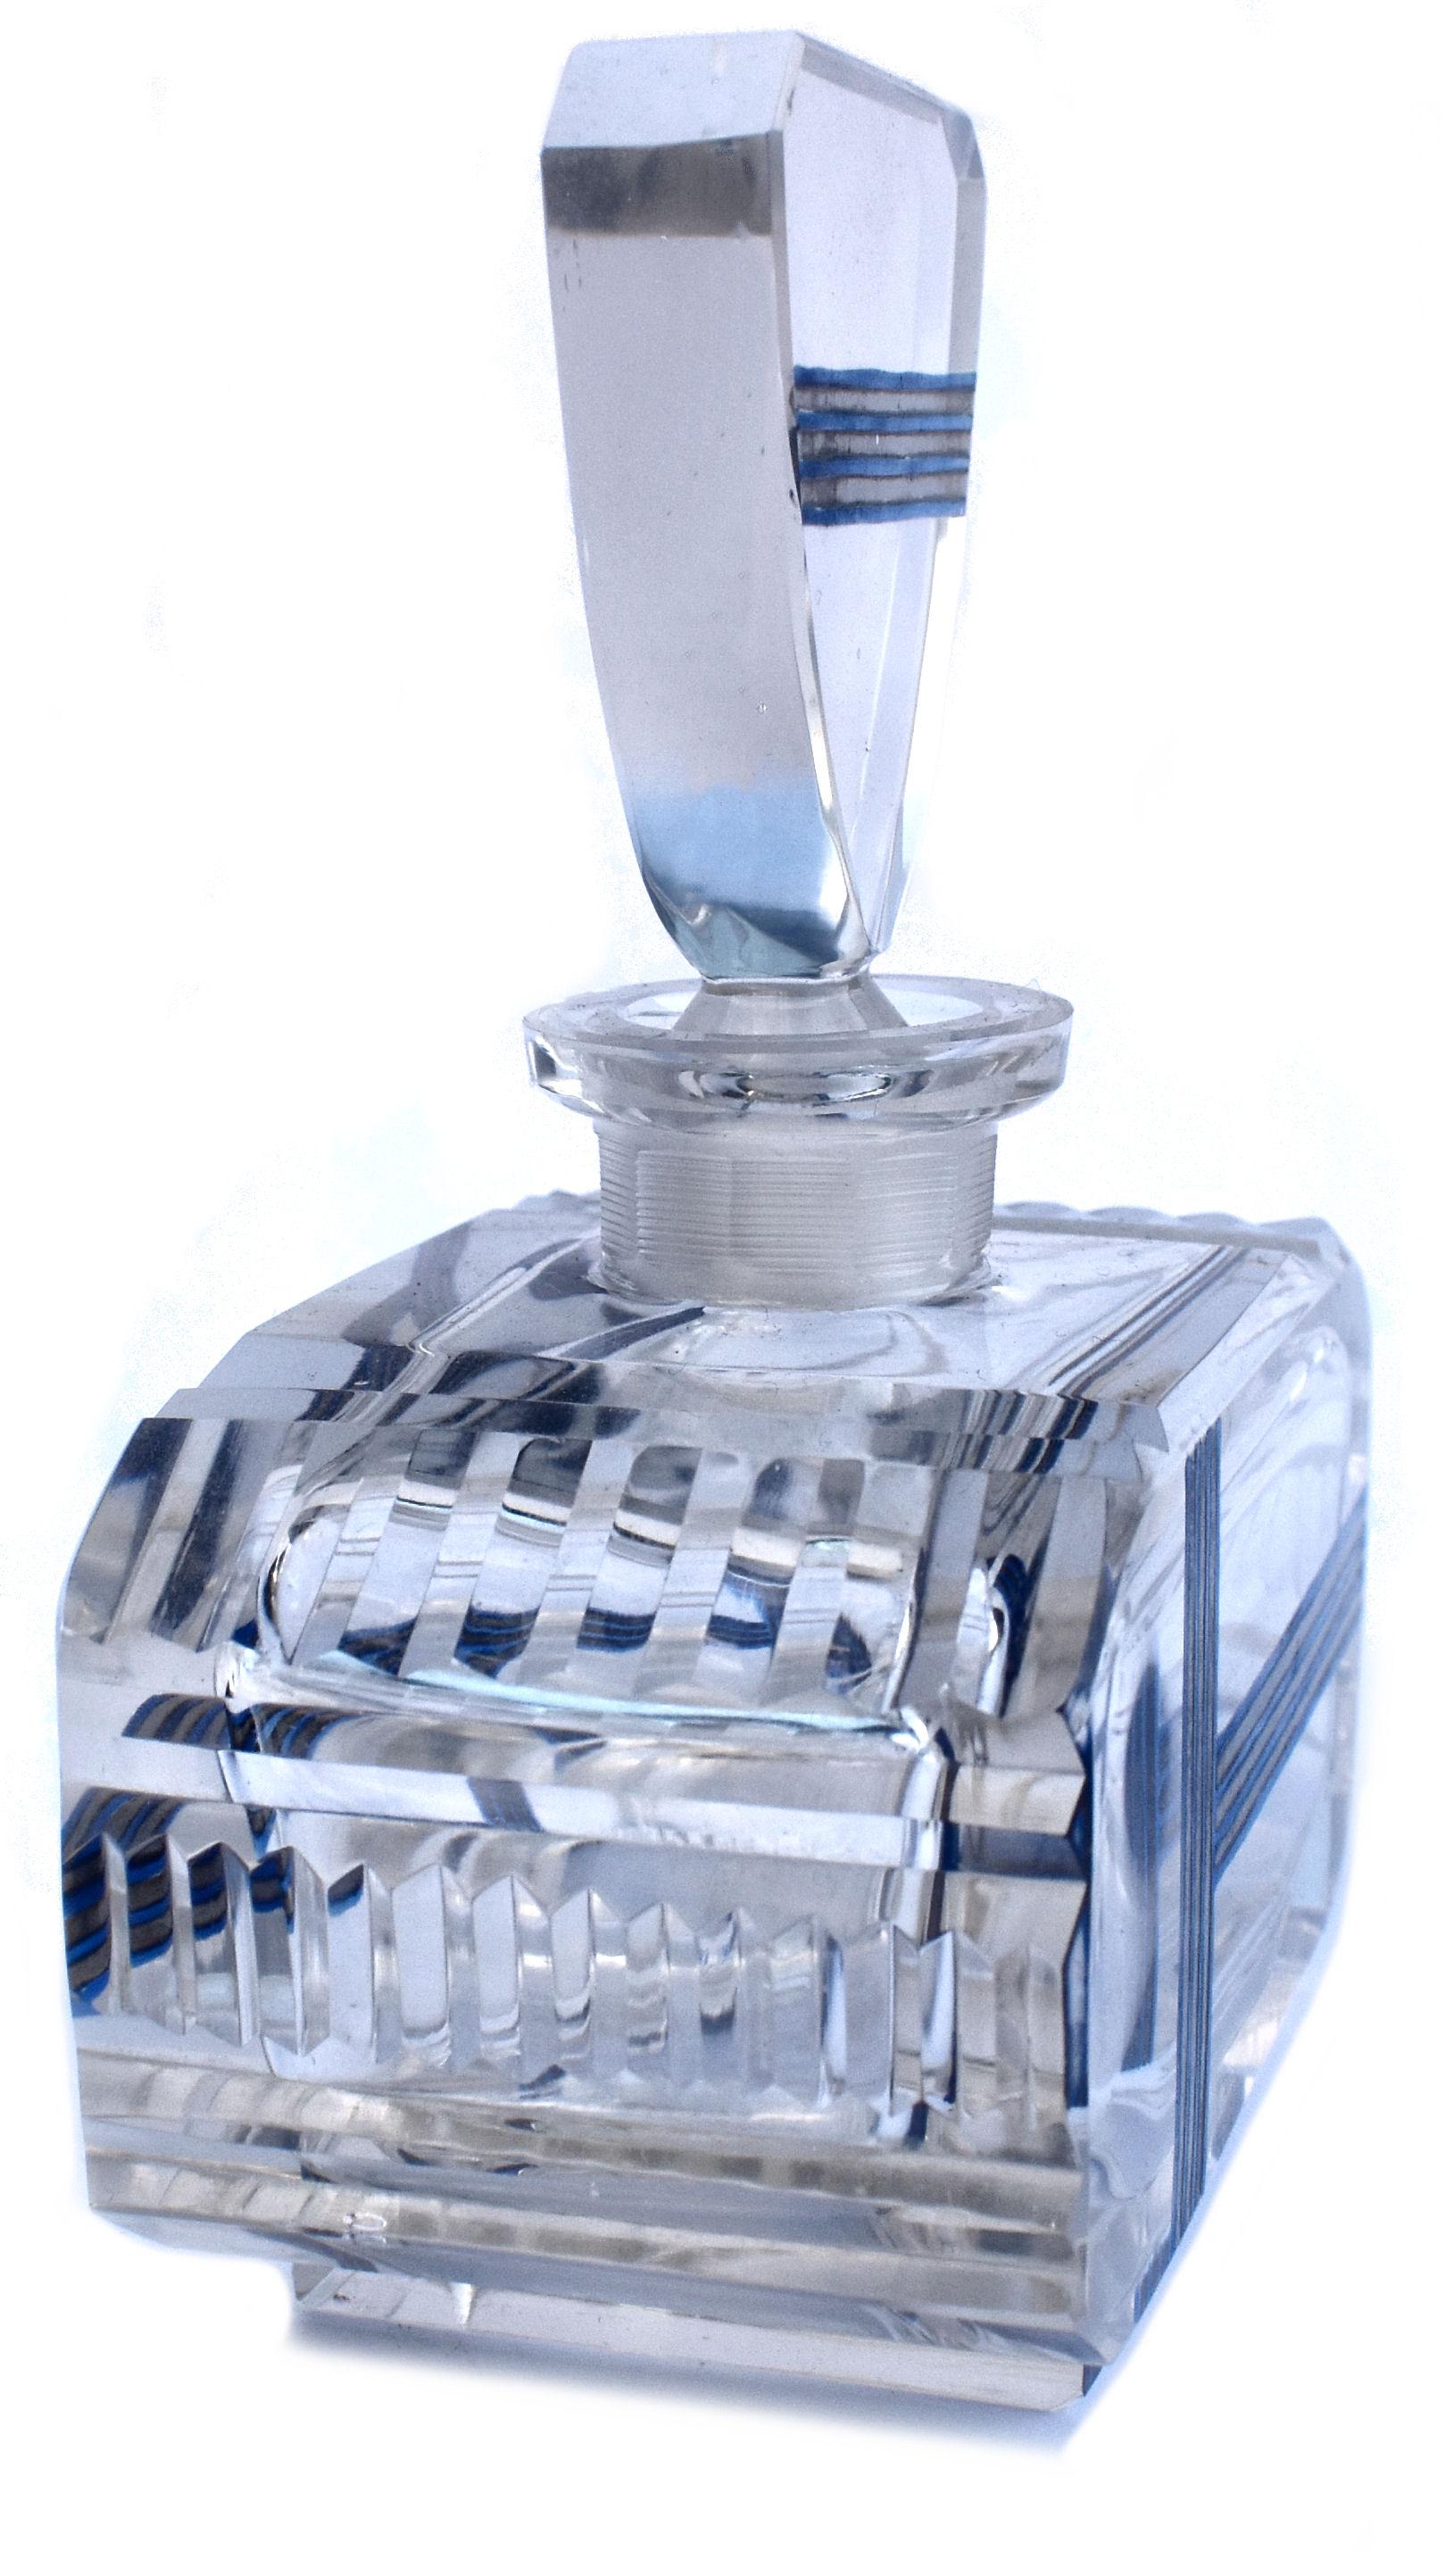 Art Deco 1930's Glass and Chrome Perfume Atomizer Bottle In Good Condition For Sale In Devon, England